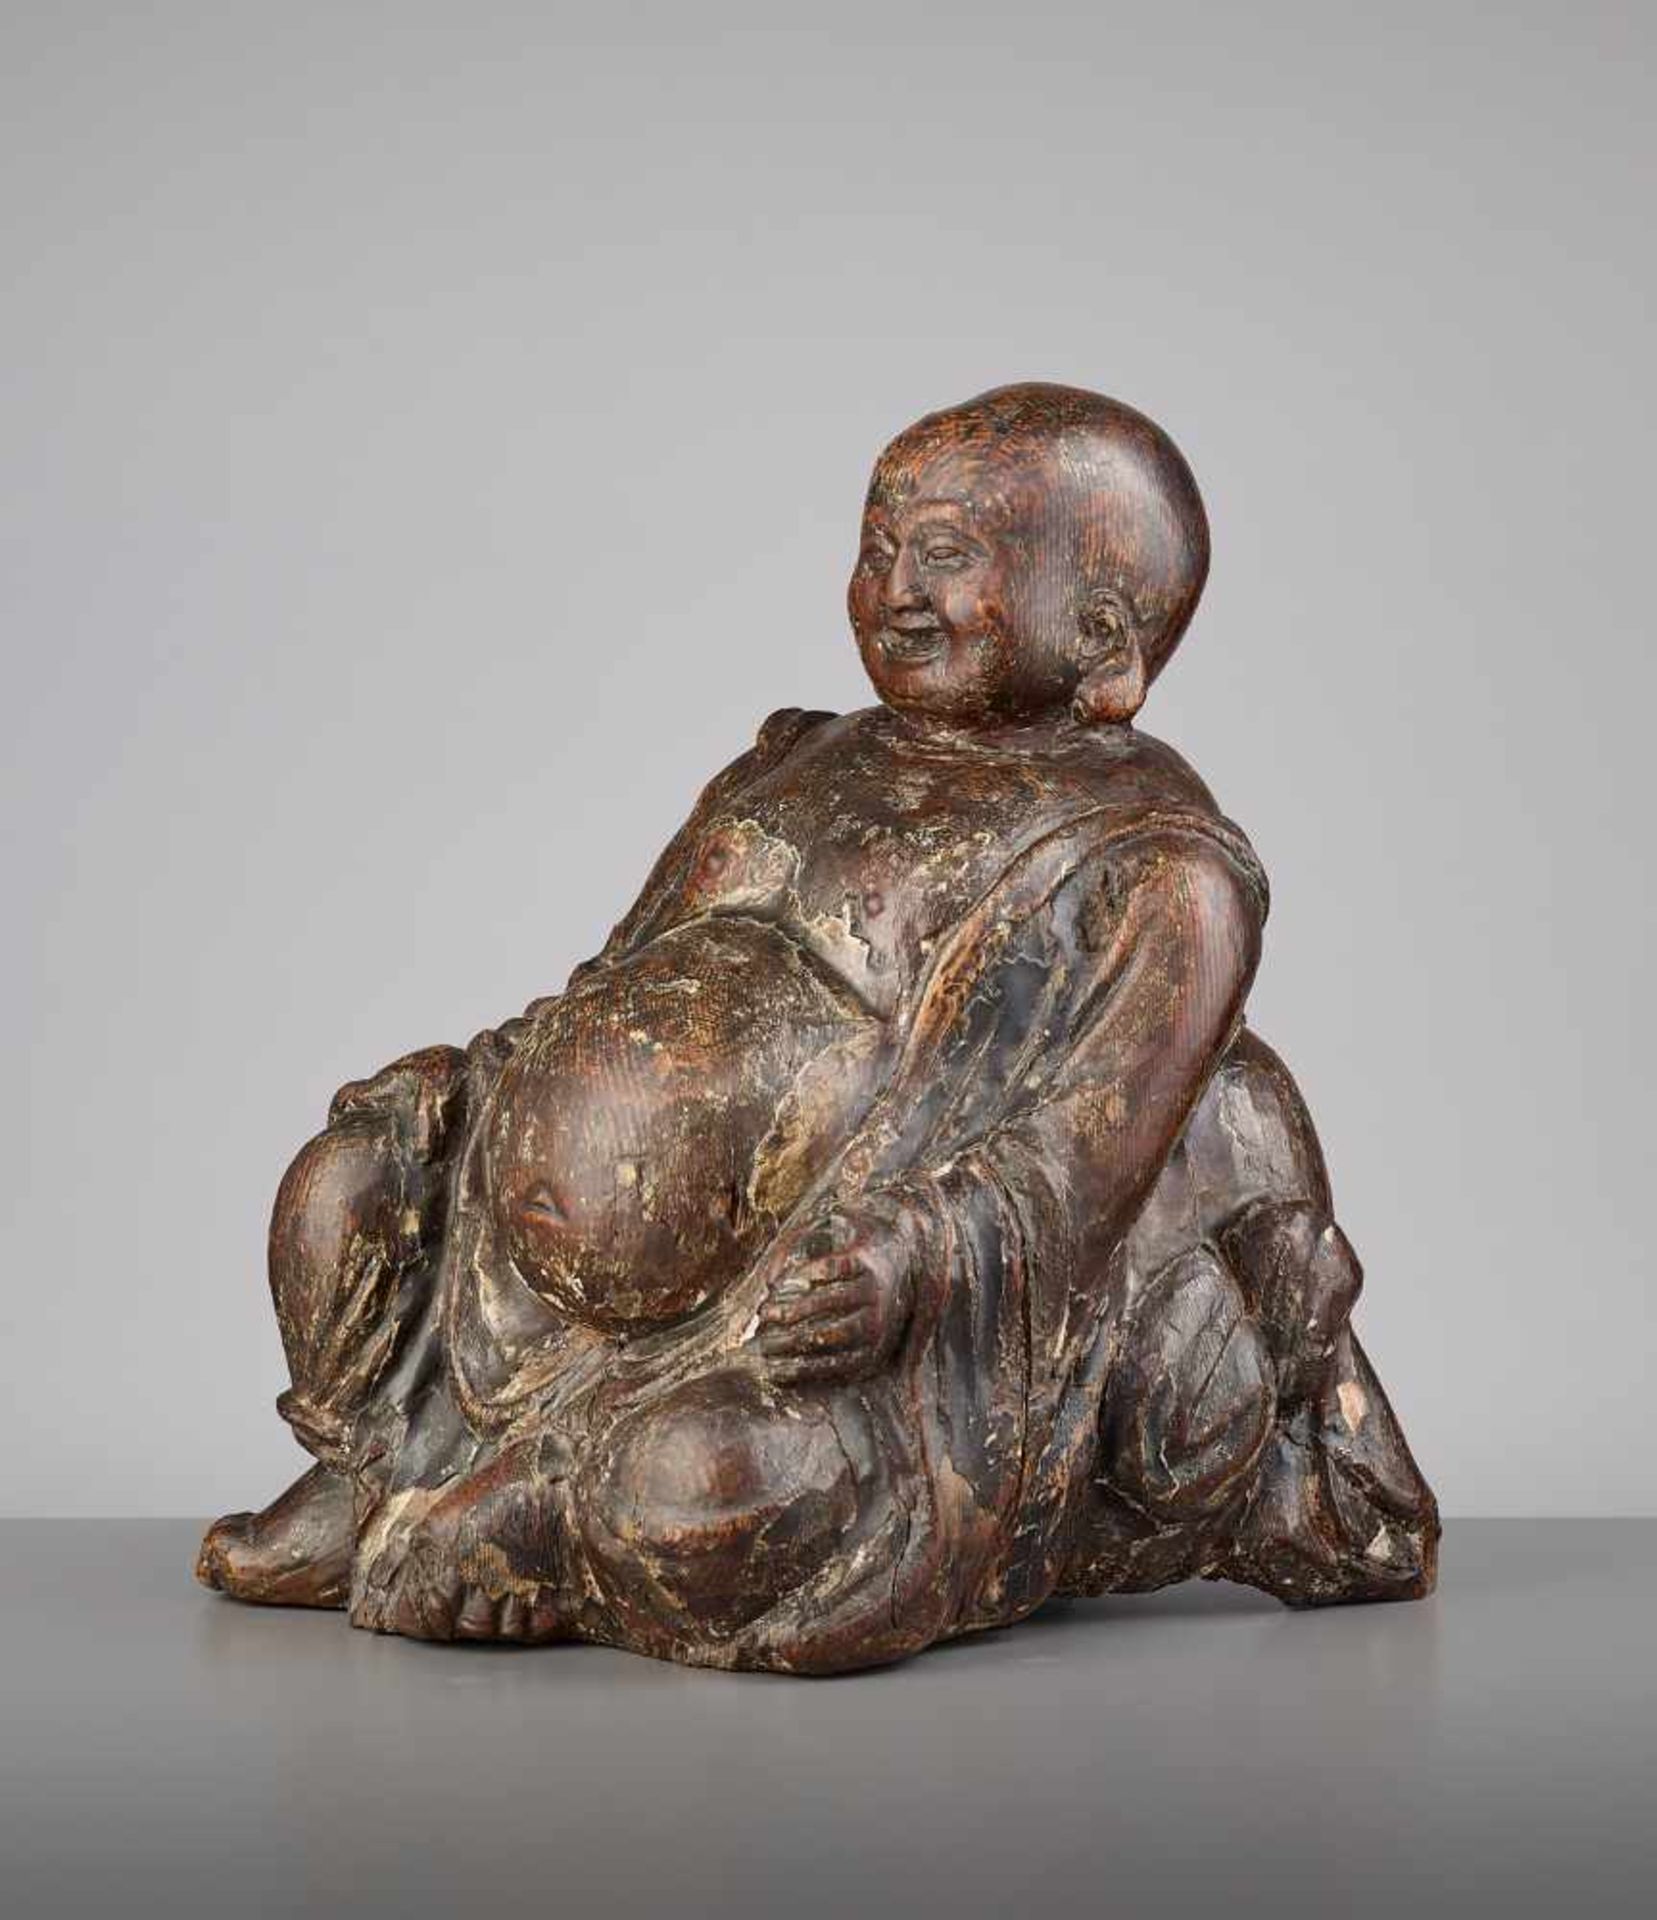 AN EXPRESSIVE WOOD BUDAI, MINGChina, 15th - 16th century. This earthy yet radiant sculpture of Budai - Image 4 of 9